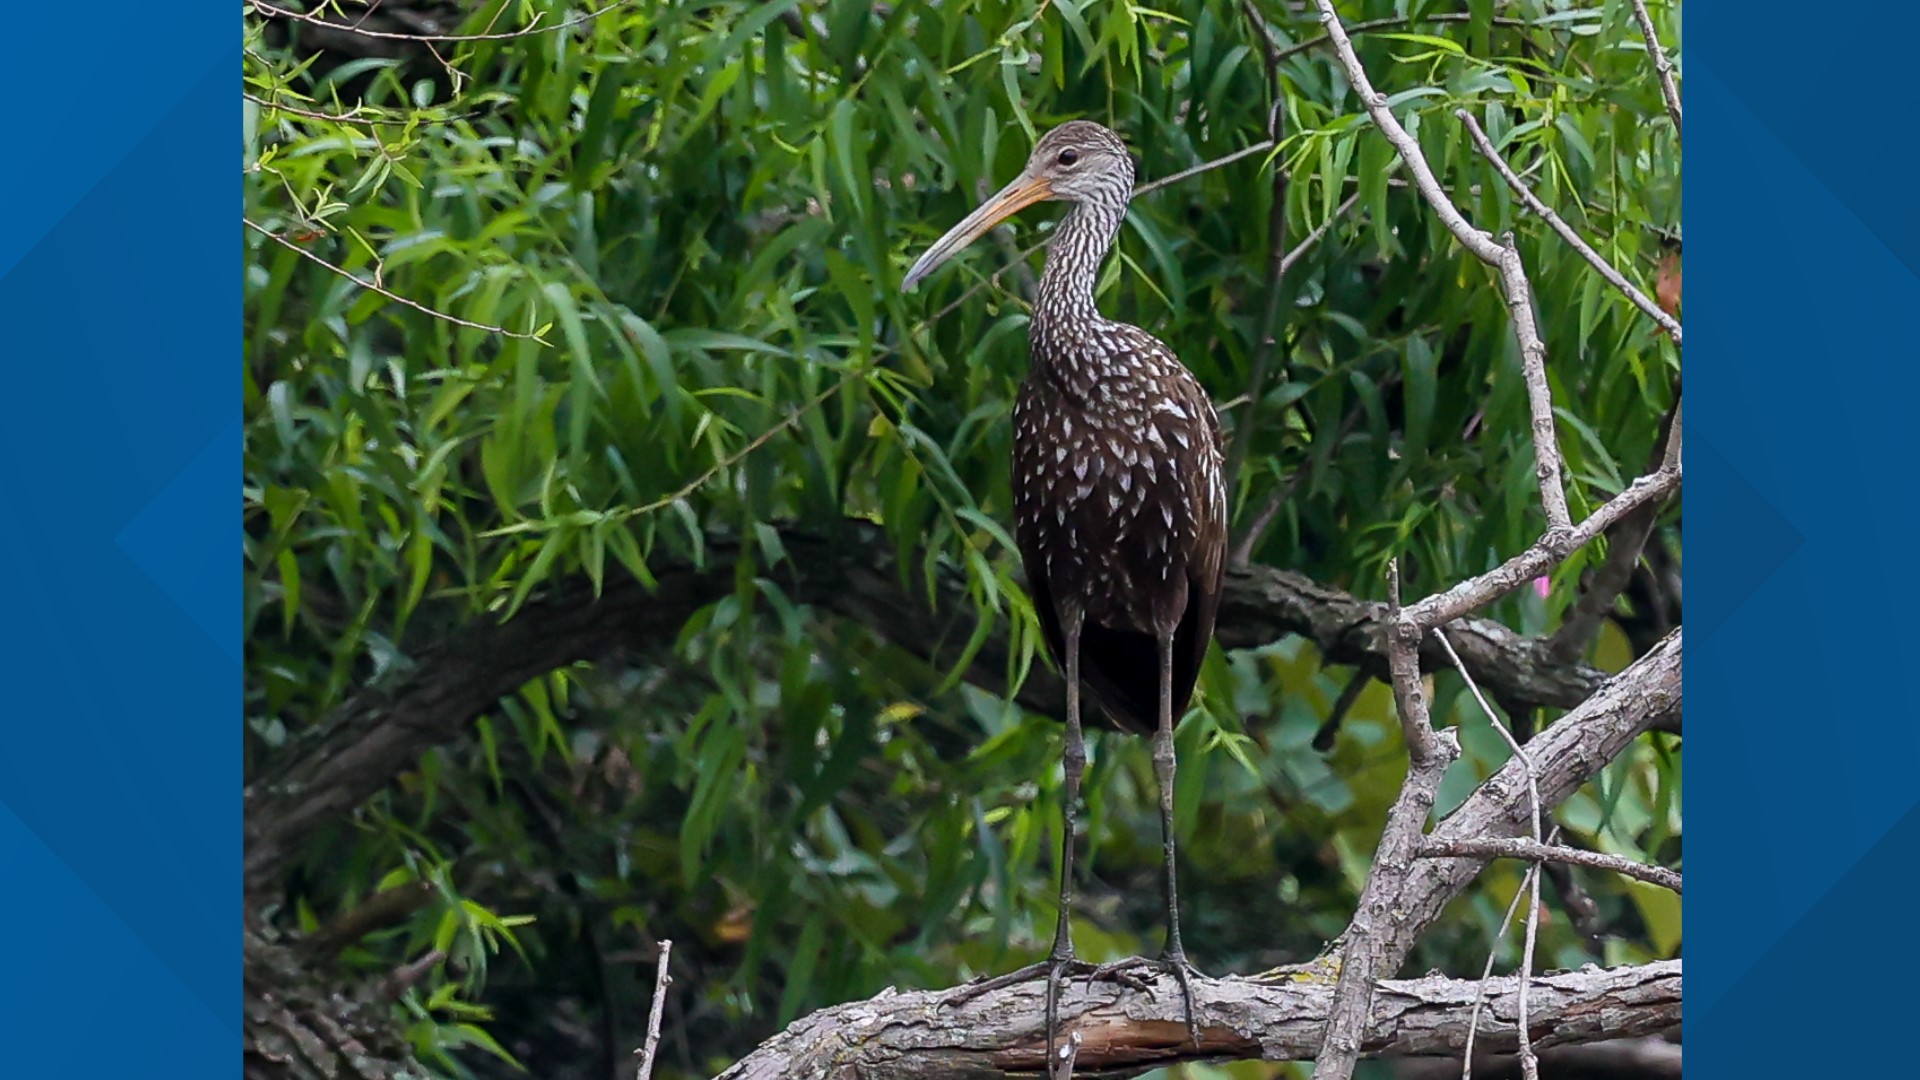 The limpkin, a bird usually found in the southern parts of the United States, was spotted for the first time on record in Pennsylvania on Friday night.